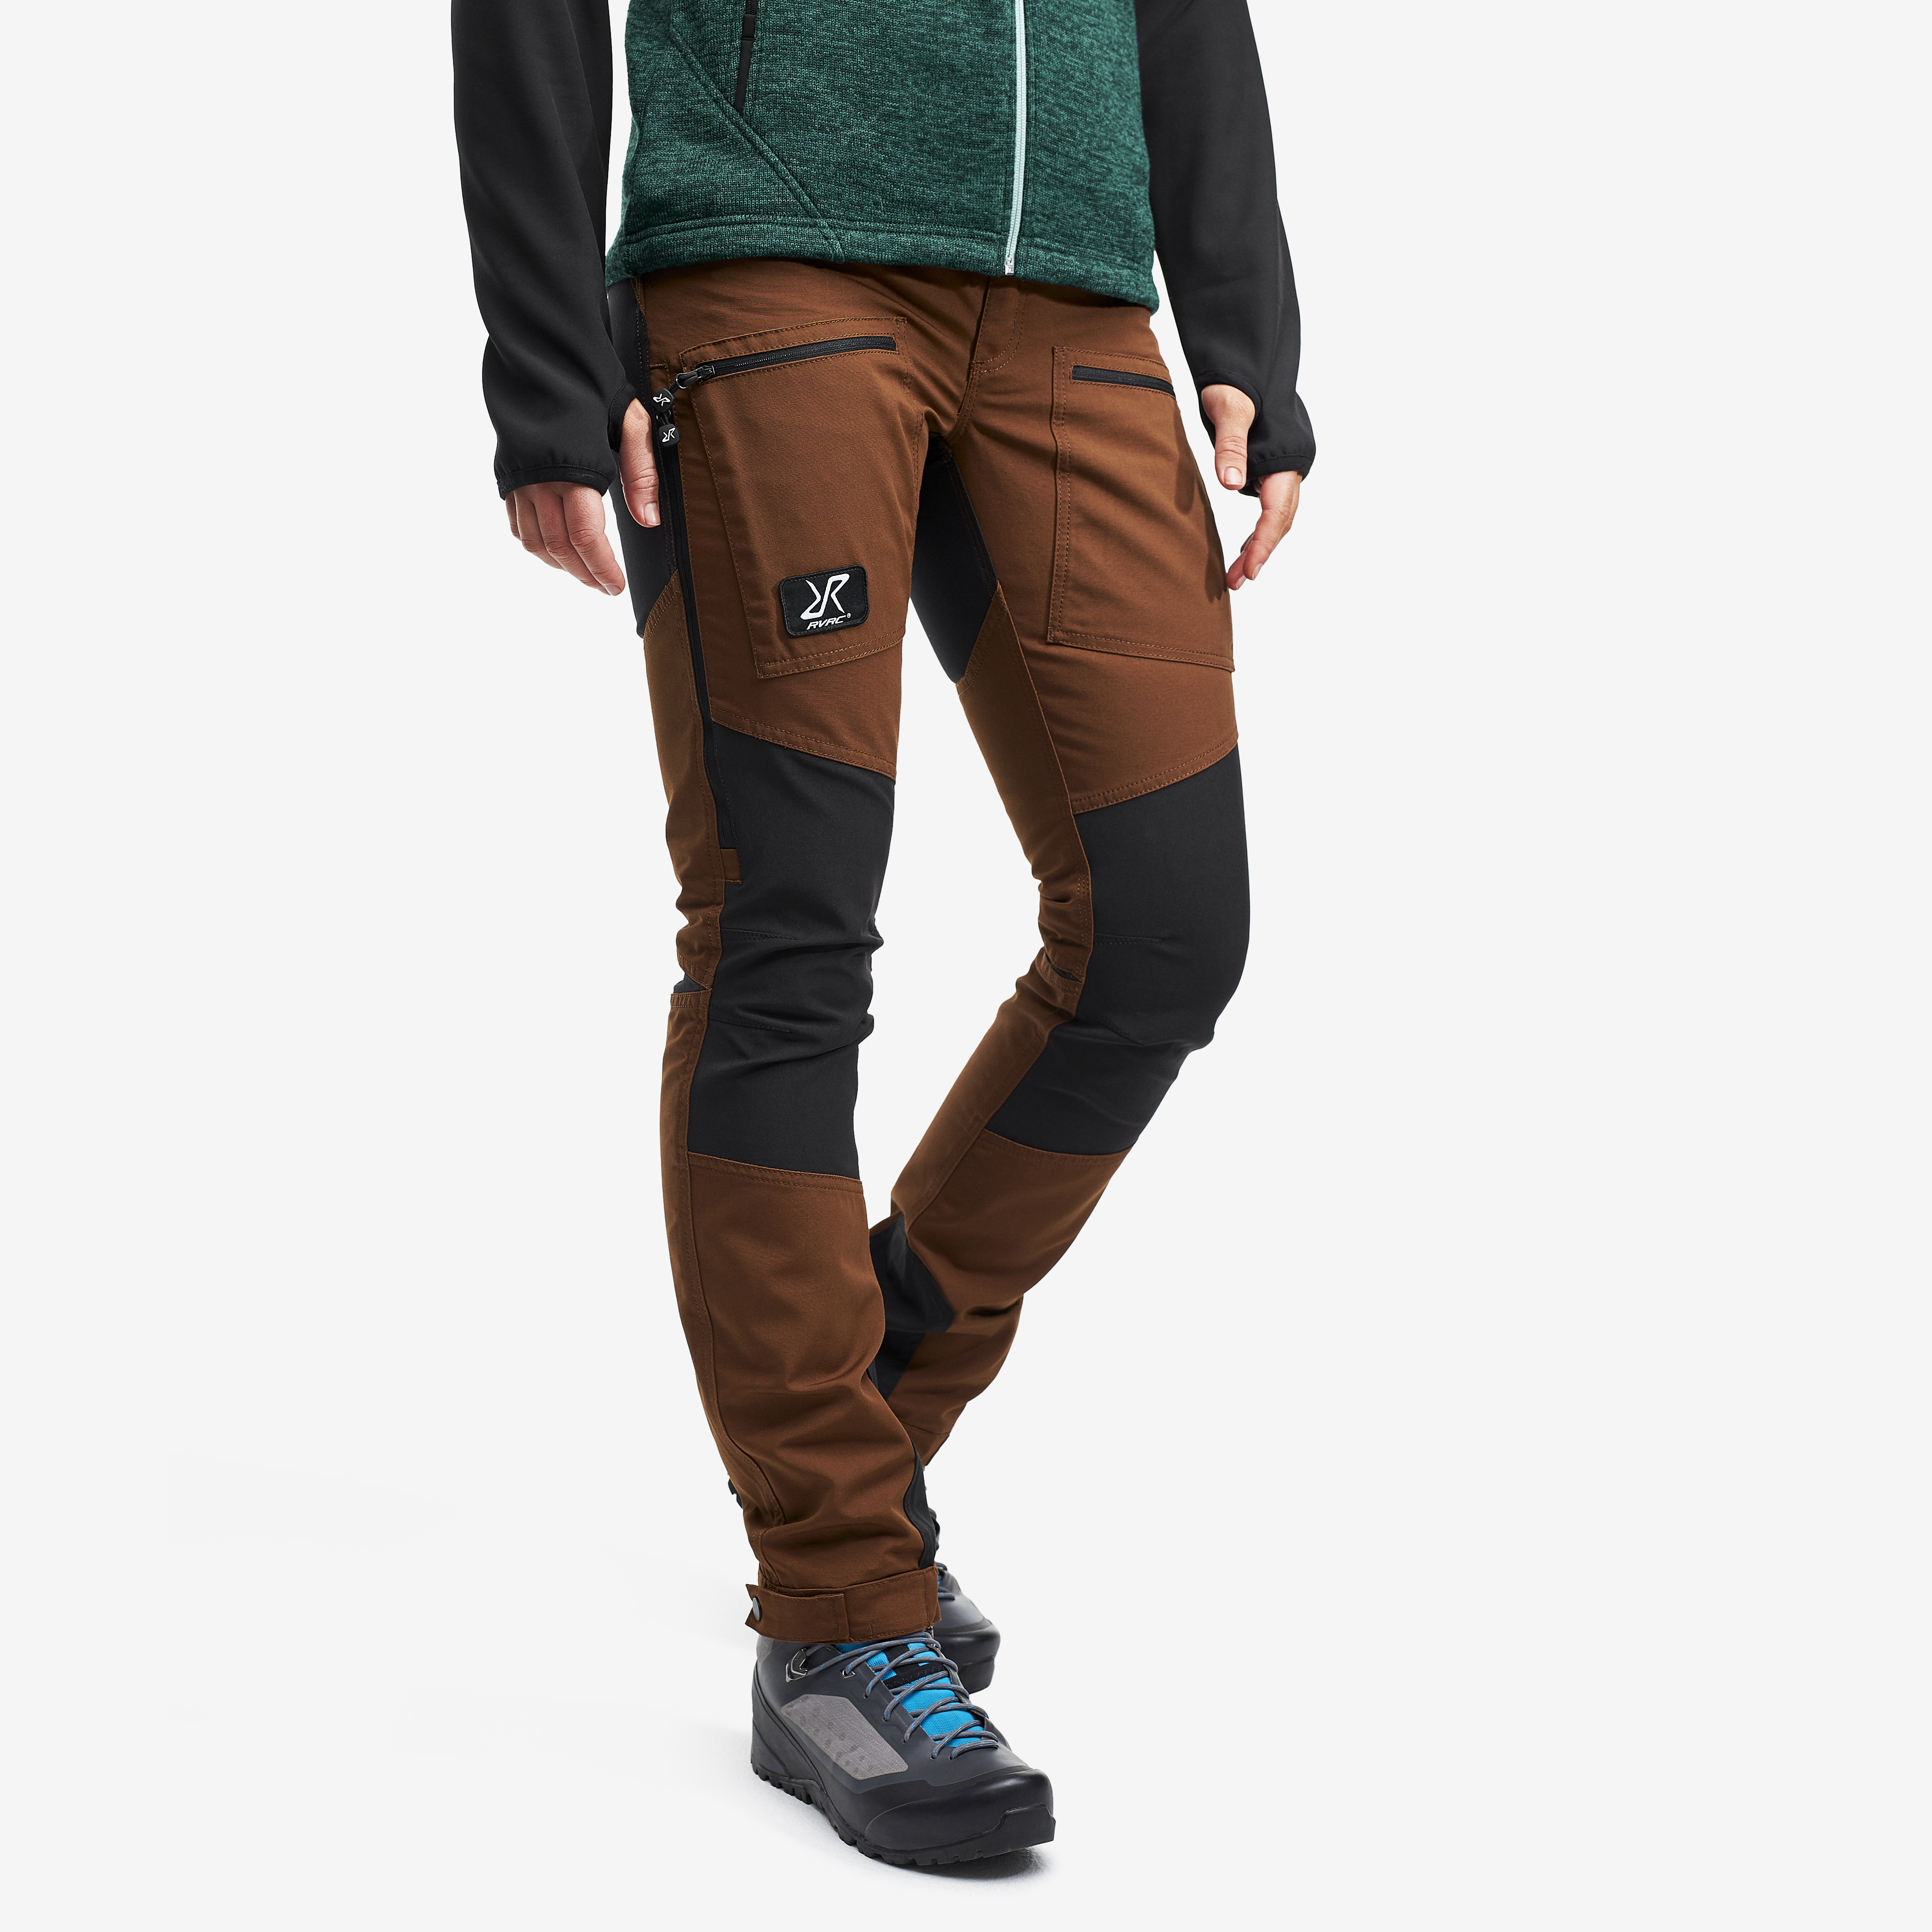 Nordwand Pro Pants Espresso Brown Dame